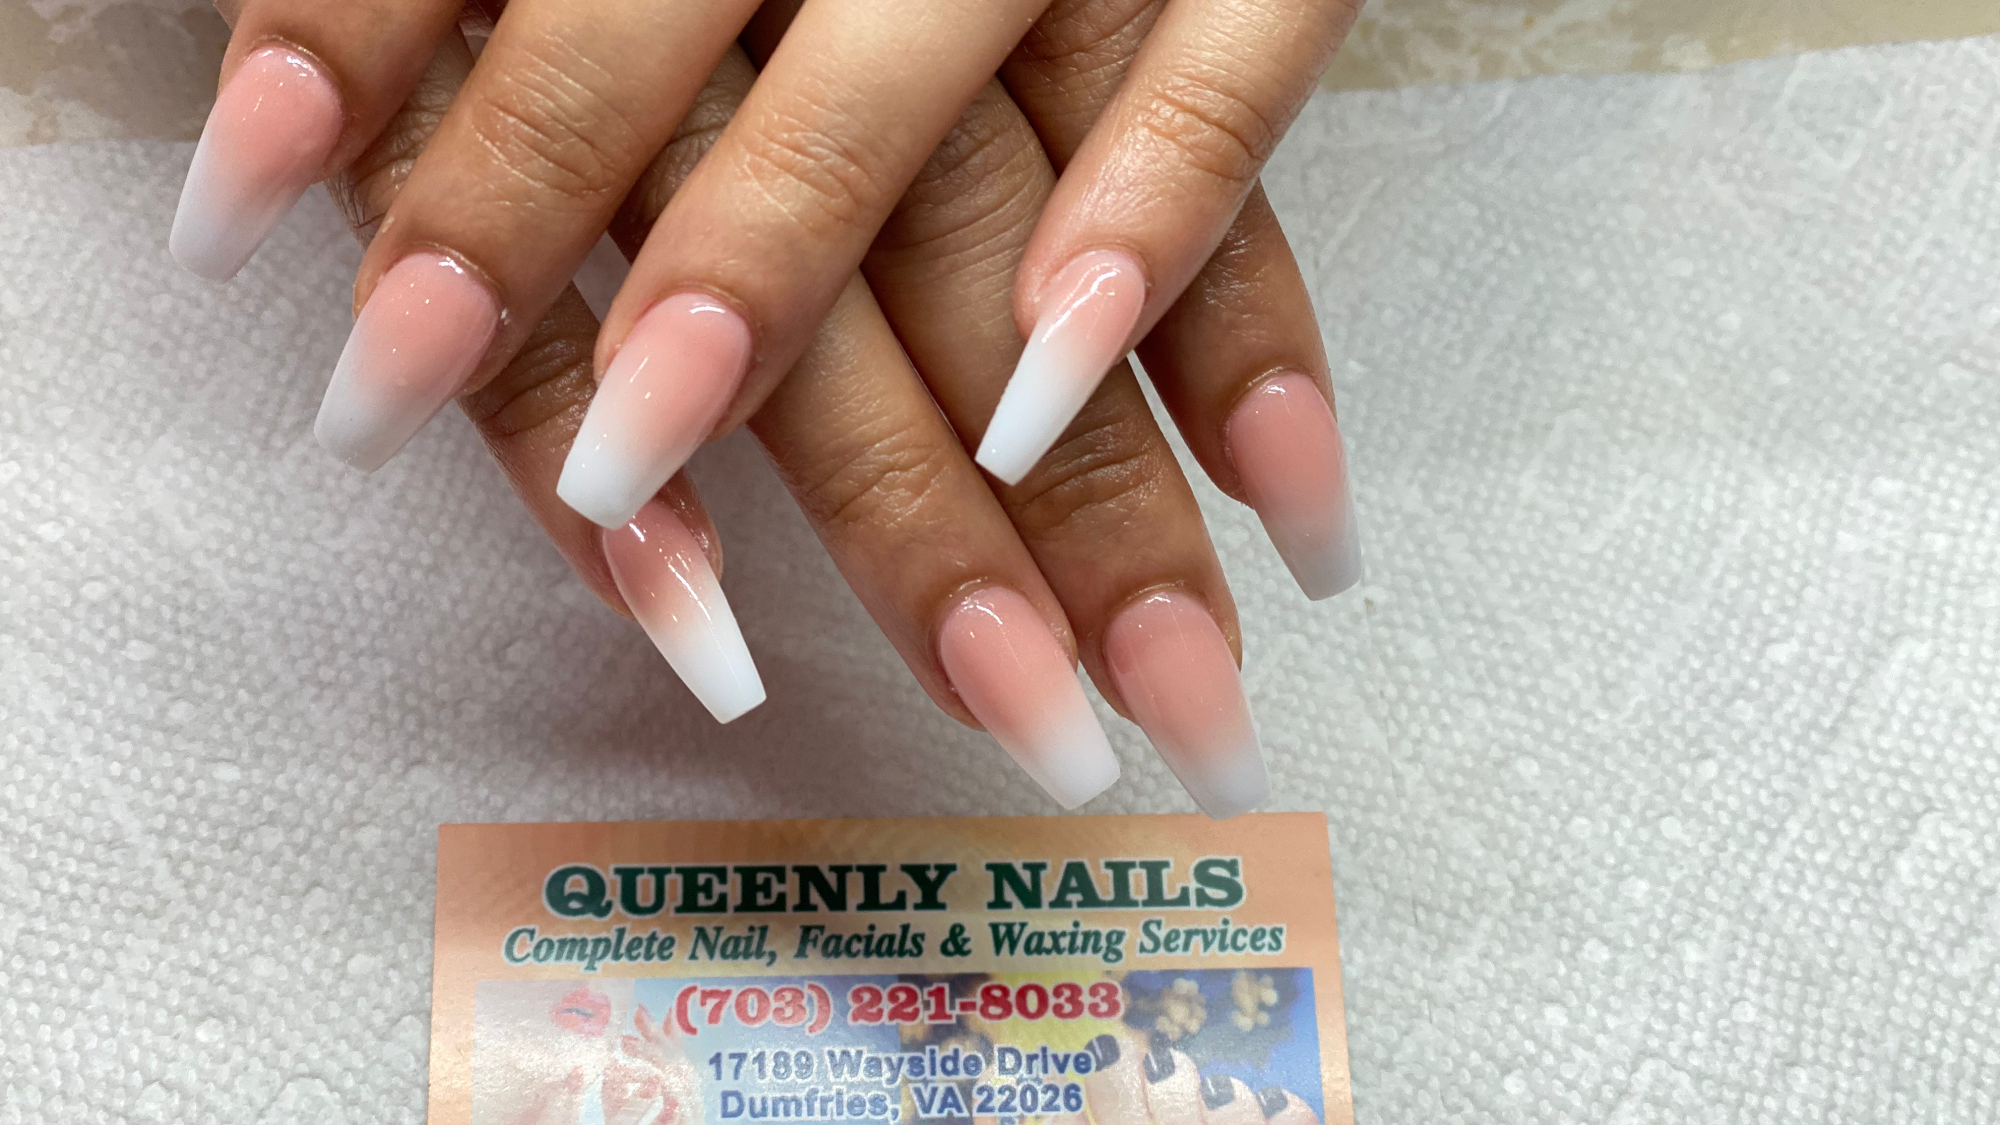 Queenly Nails spa